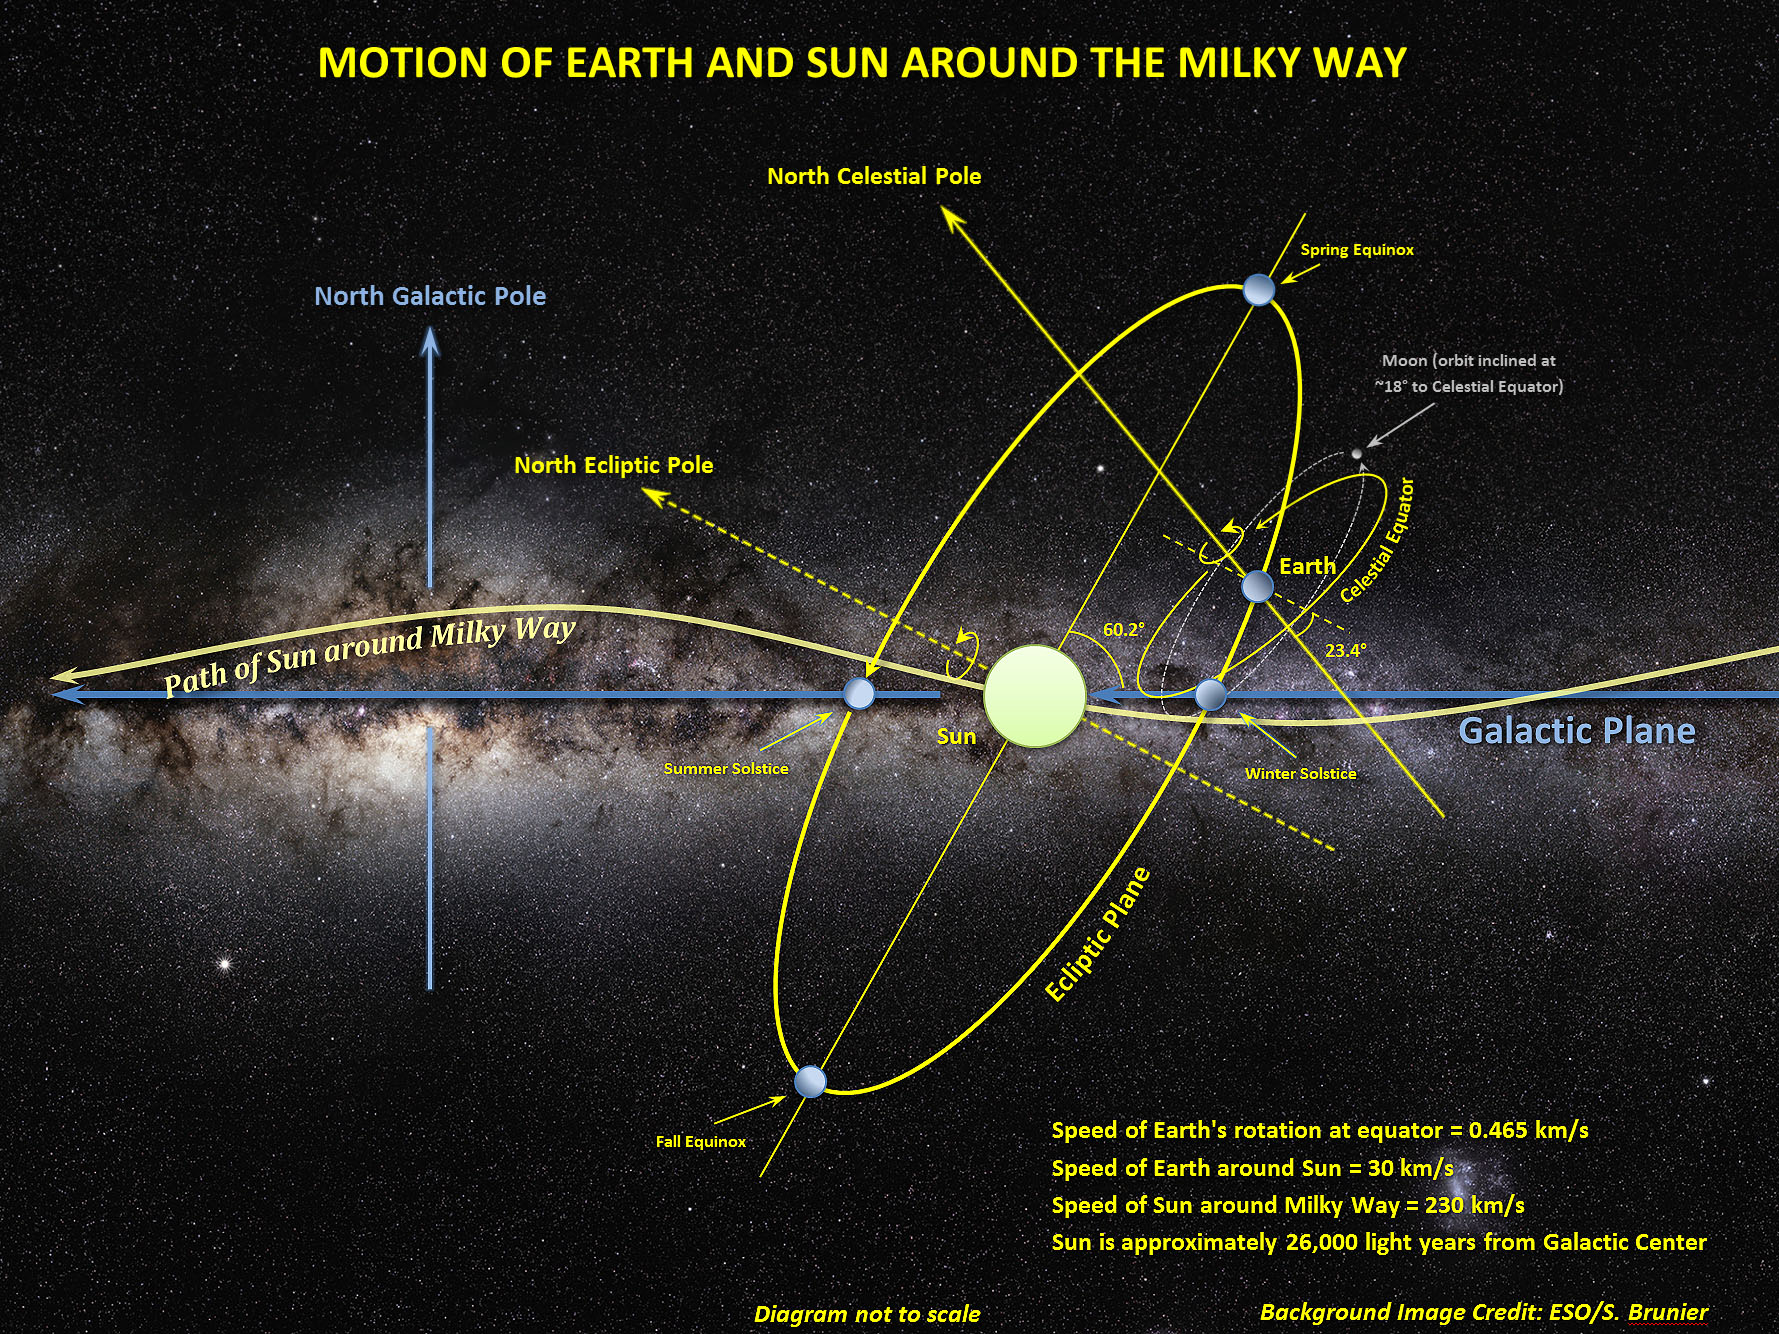 Evaluating the number of times the Sun has orbited the Milky Way